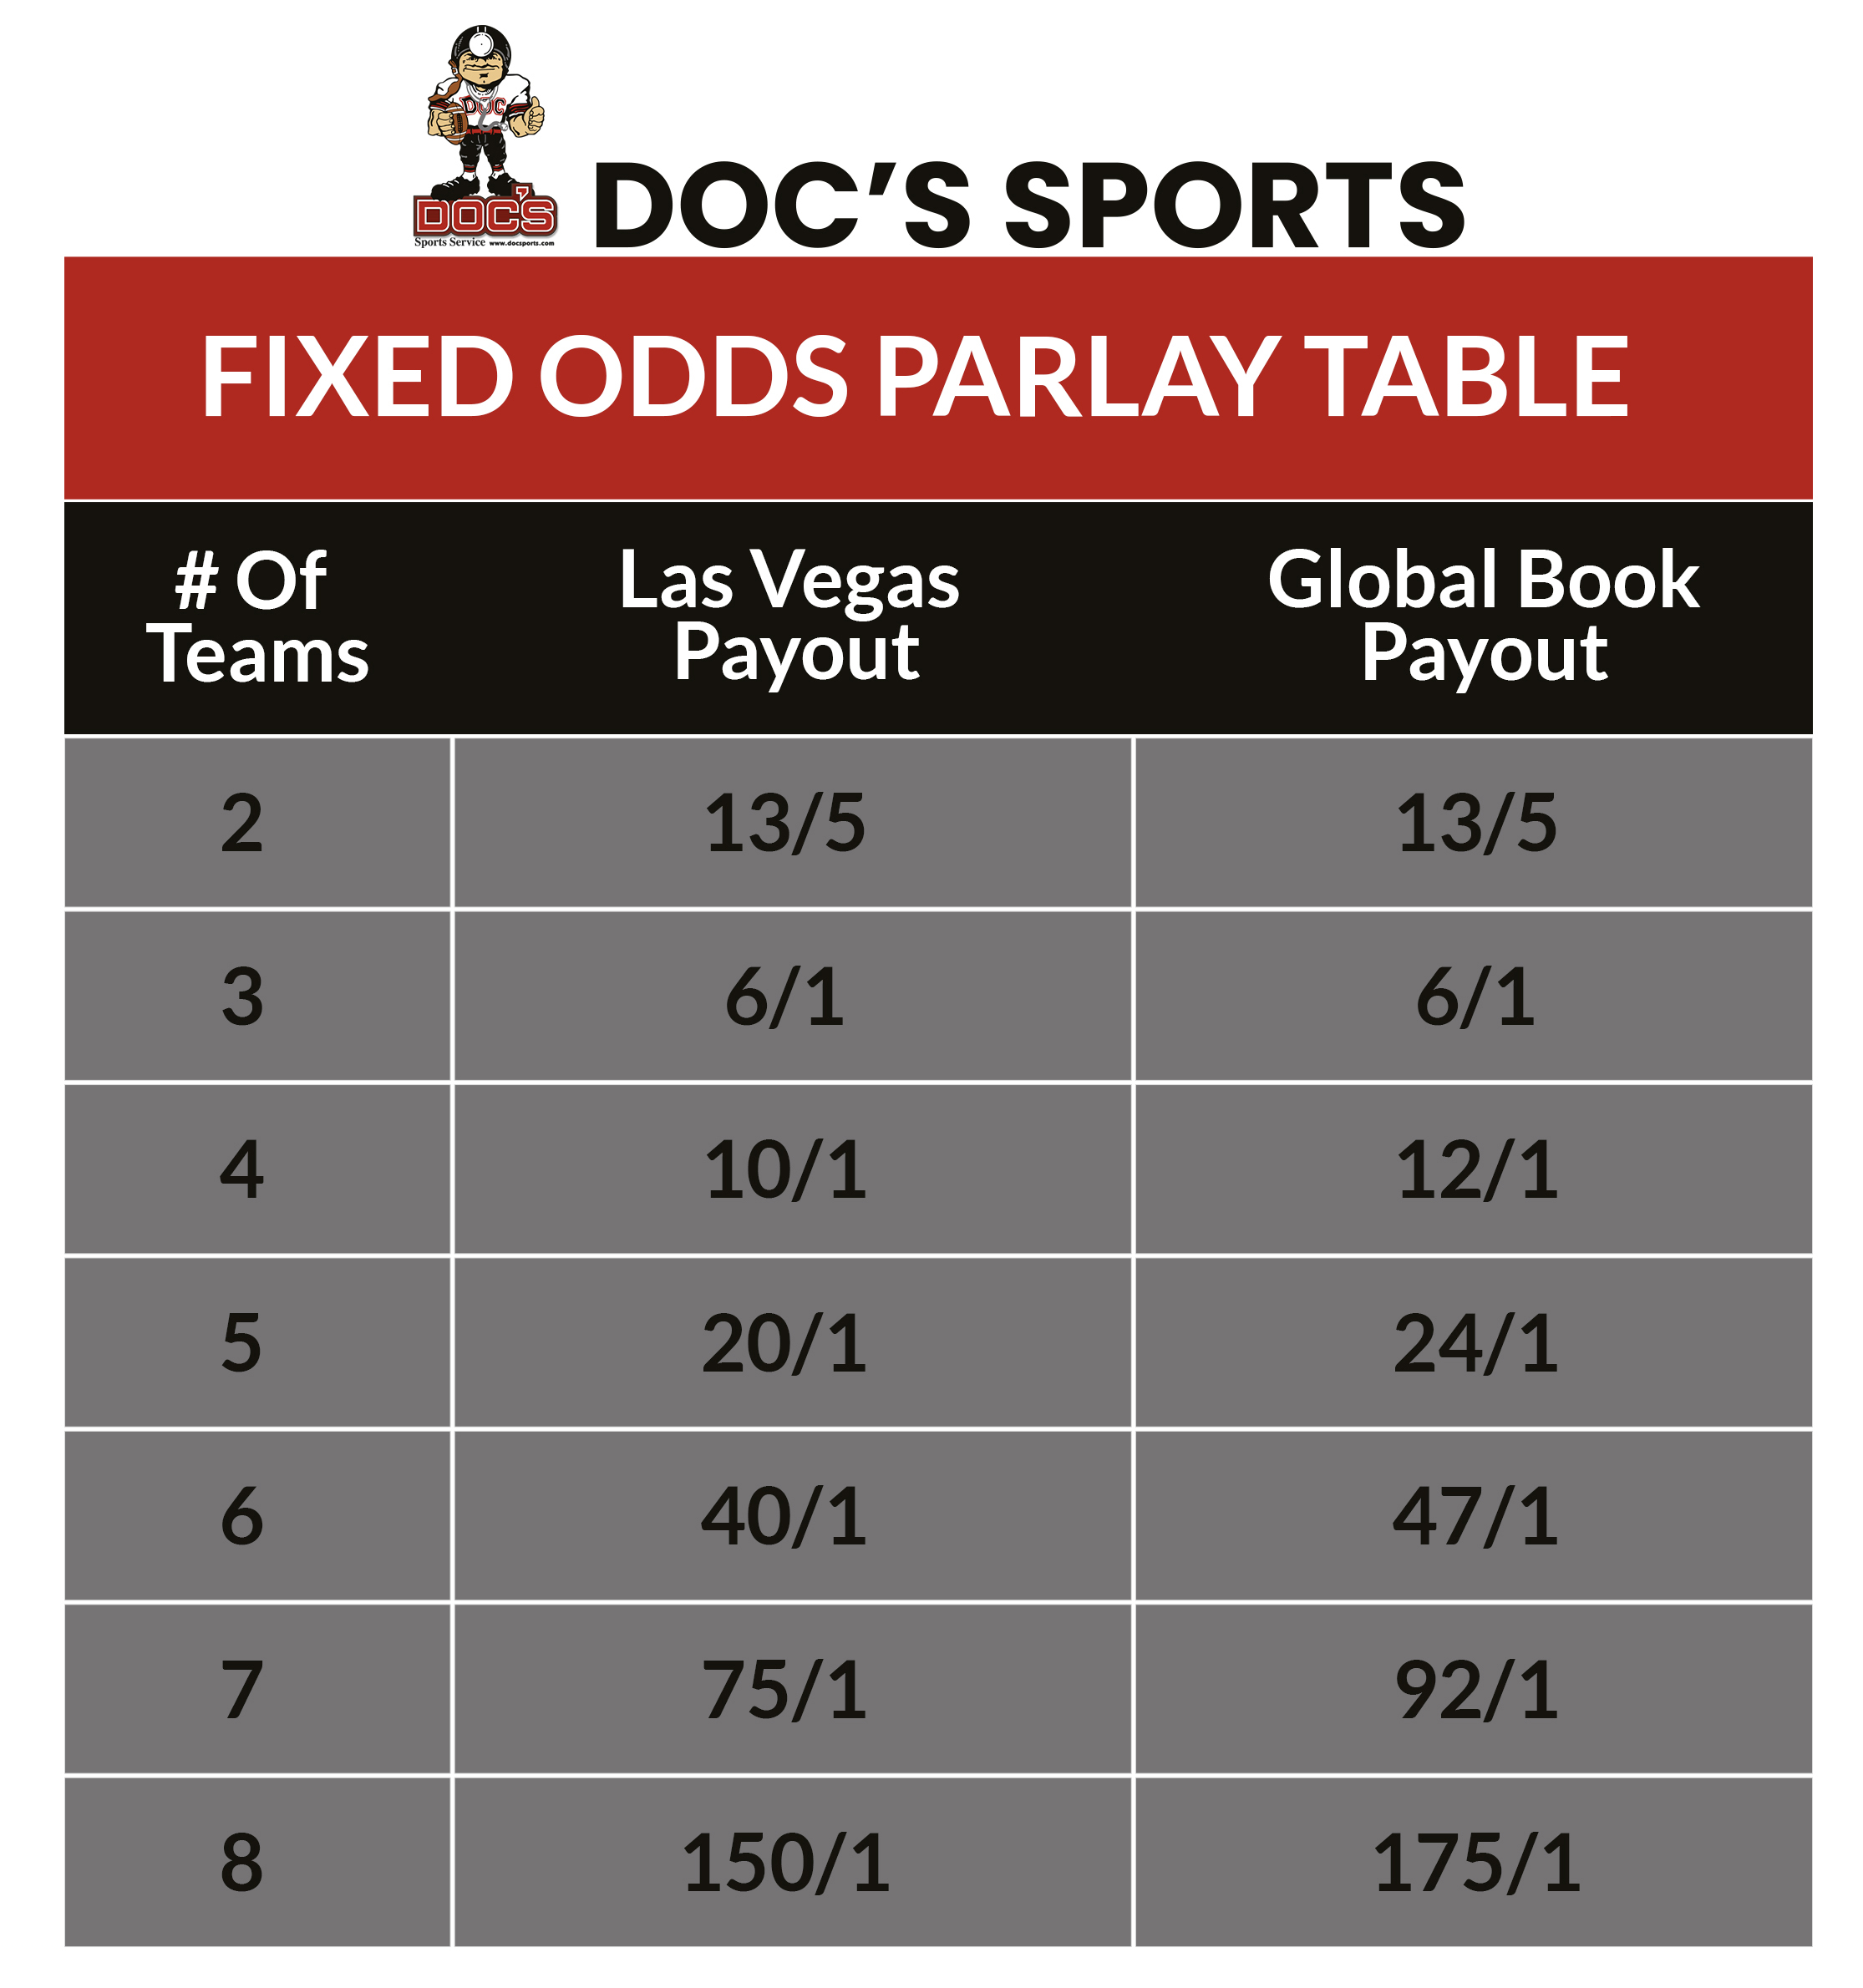 Parlay Odds and payouts for fixed odds and Las Vegas parlays